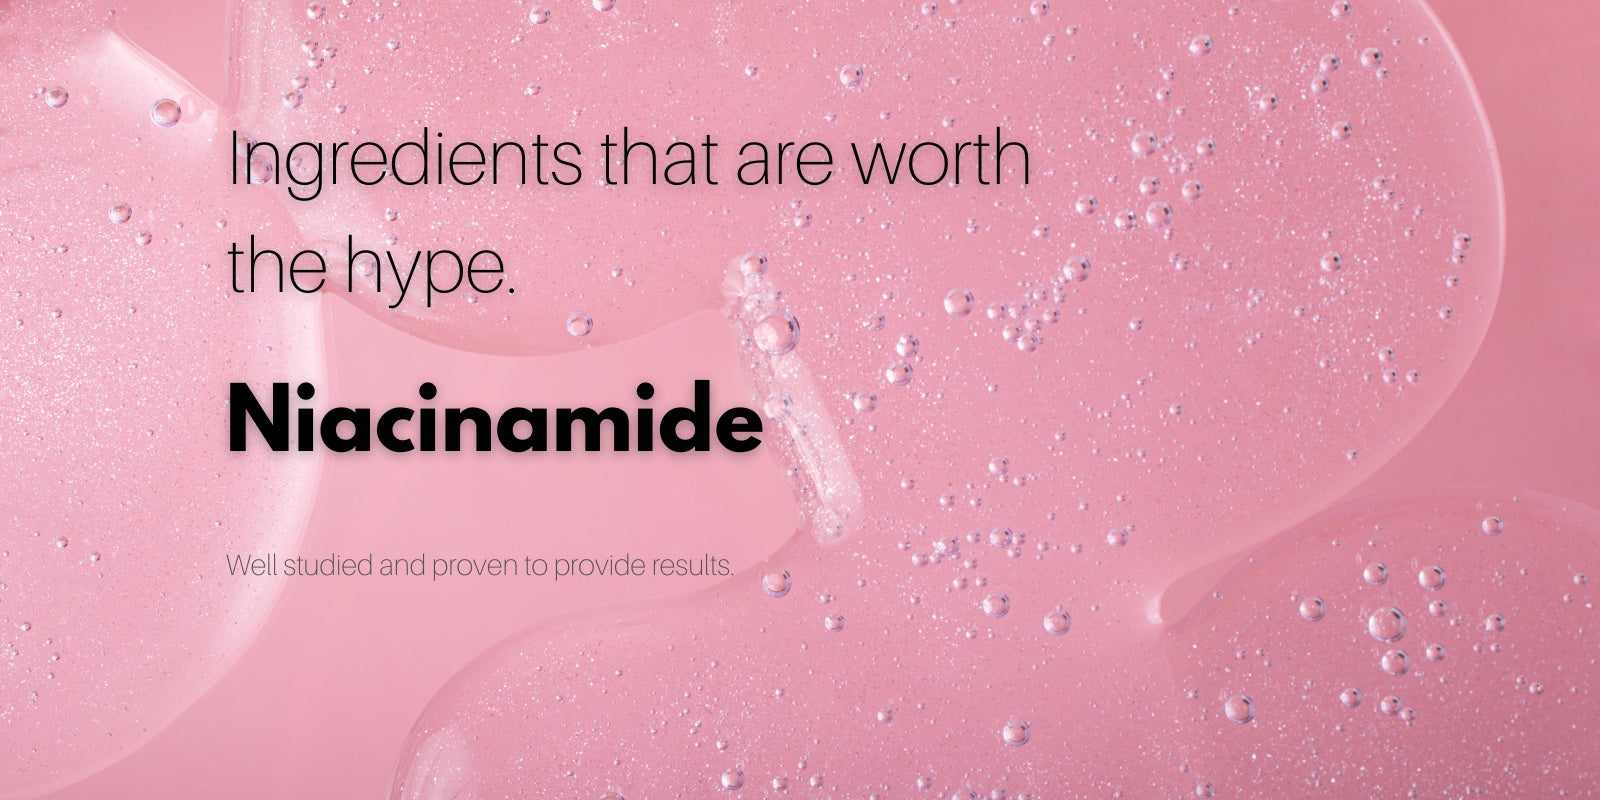 Niacinamide skincare is worth the hype. Victoria BC Vancouver BC